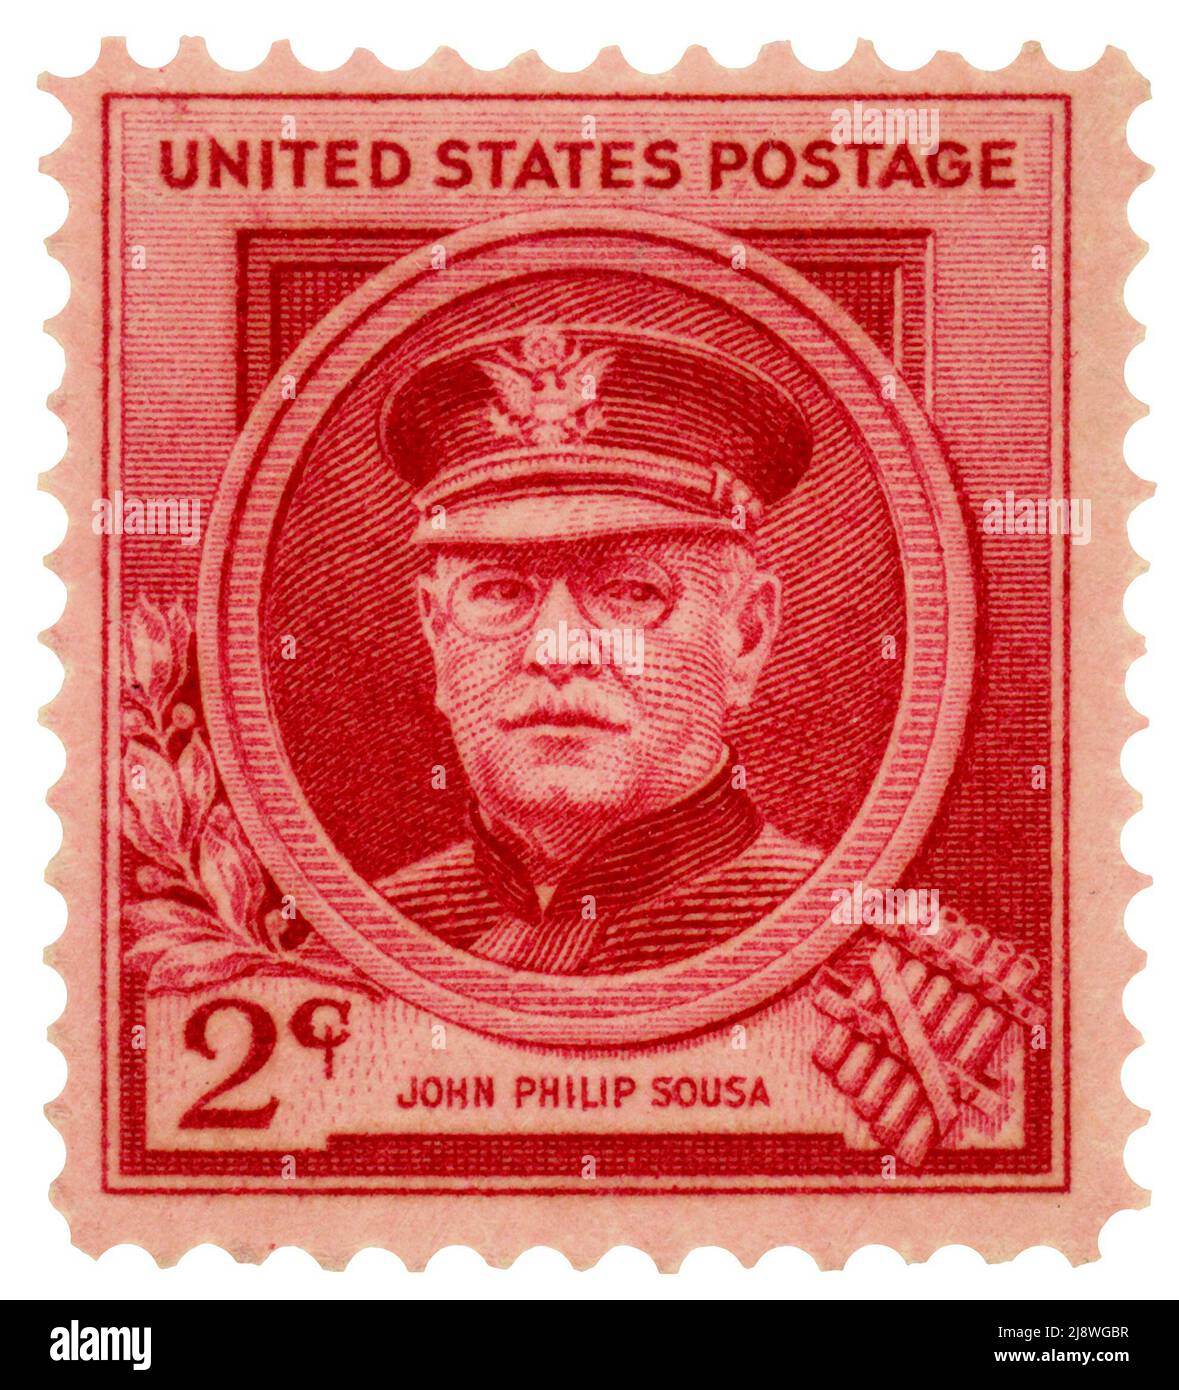 John Philip Sousa (1854-1932) directed the US Marine Corps Band from 1880 to 1892, and then conducted his own band. He numerous 100 marches. the famous ones include including 'Semper Fidelis' (the Marine Corps march), 'The Washington Post March,' and the 'The Stars and Stripes Forever.' He is pictured here on a rose colored stamp. Stock Photo